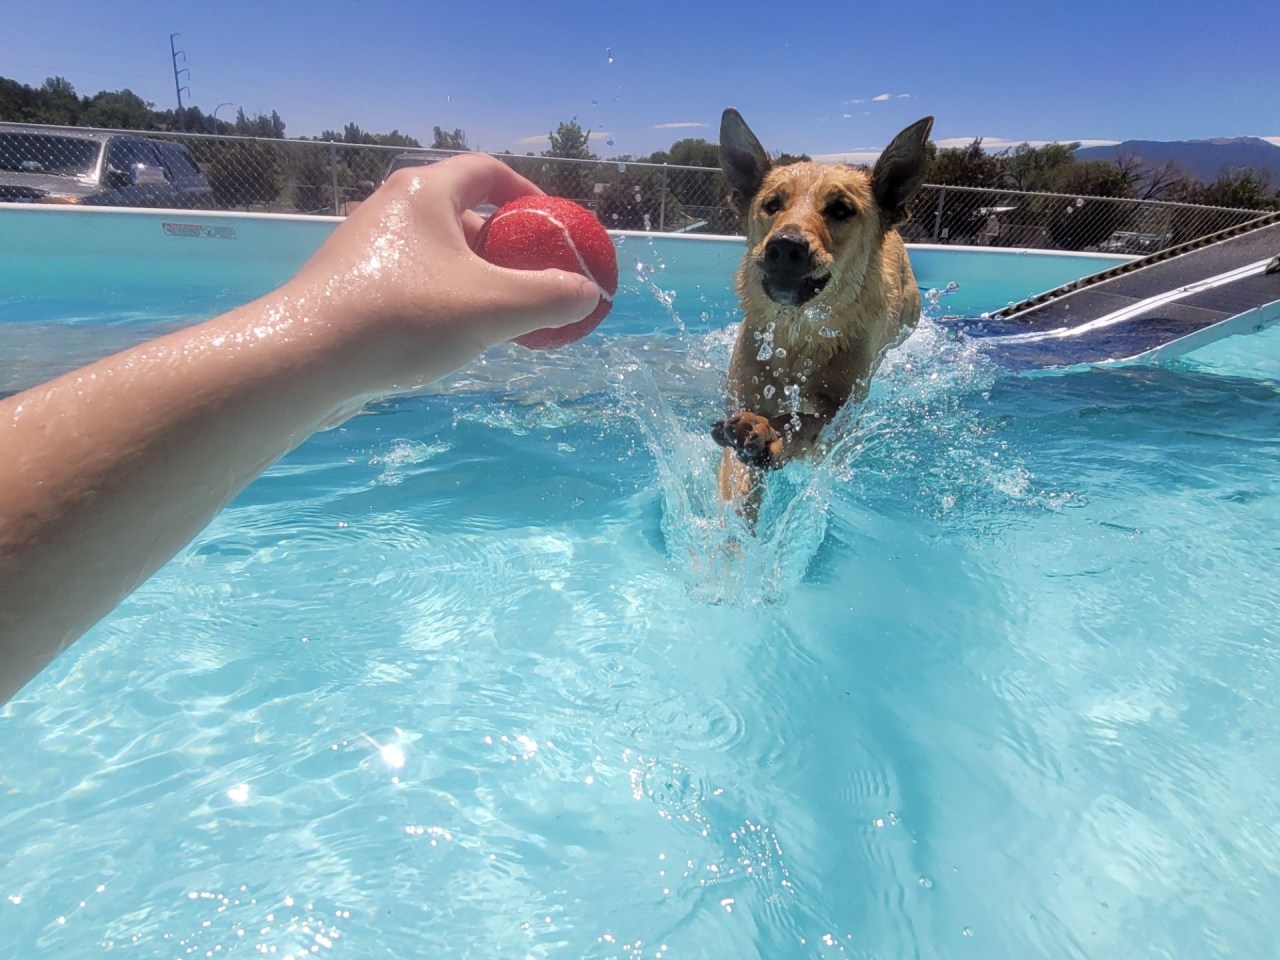 A new dog diving pool opens in Colorado Springs